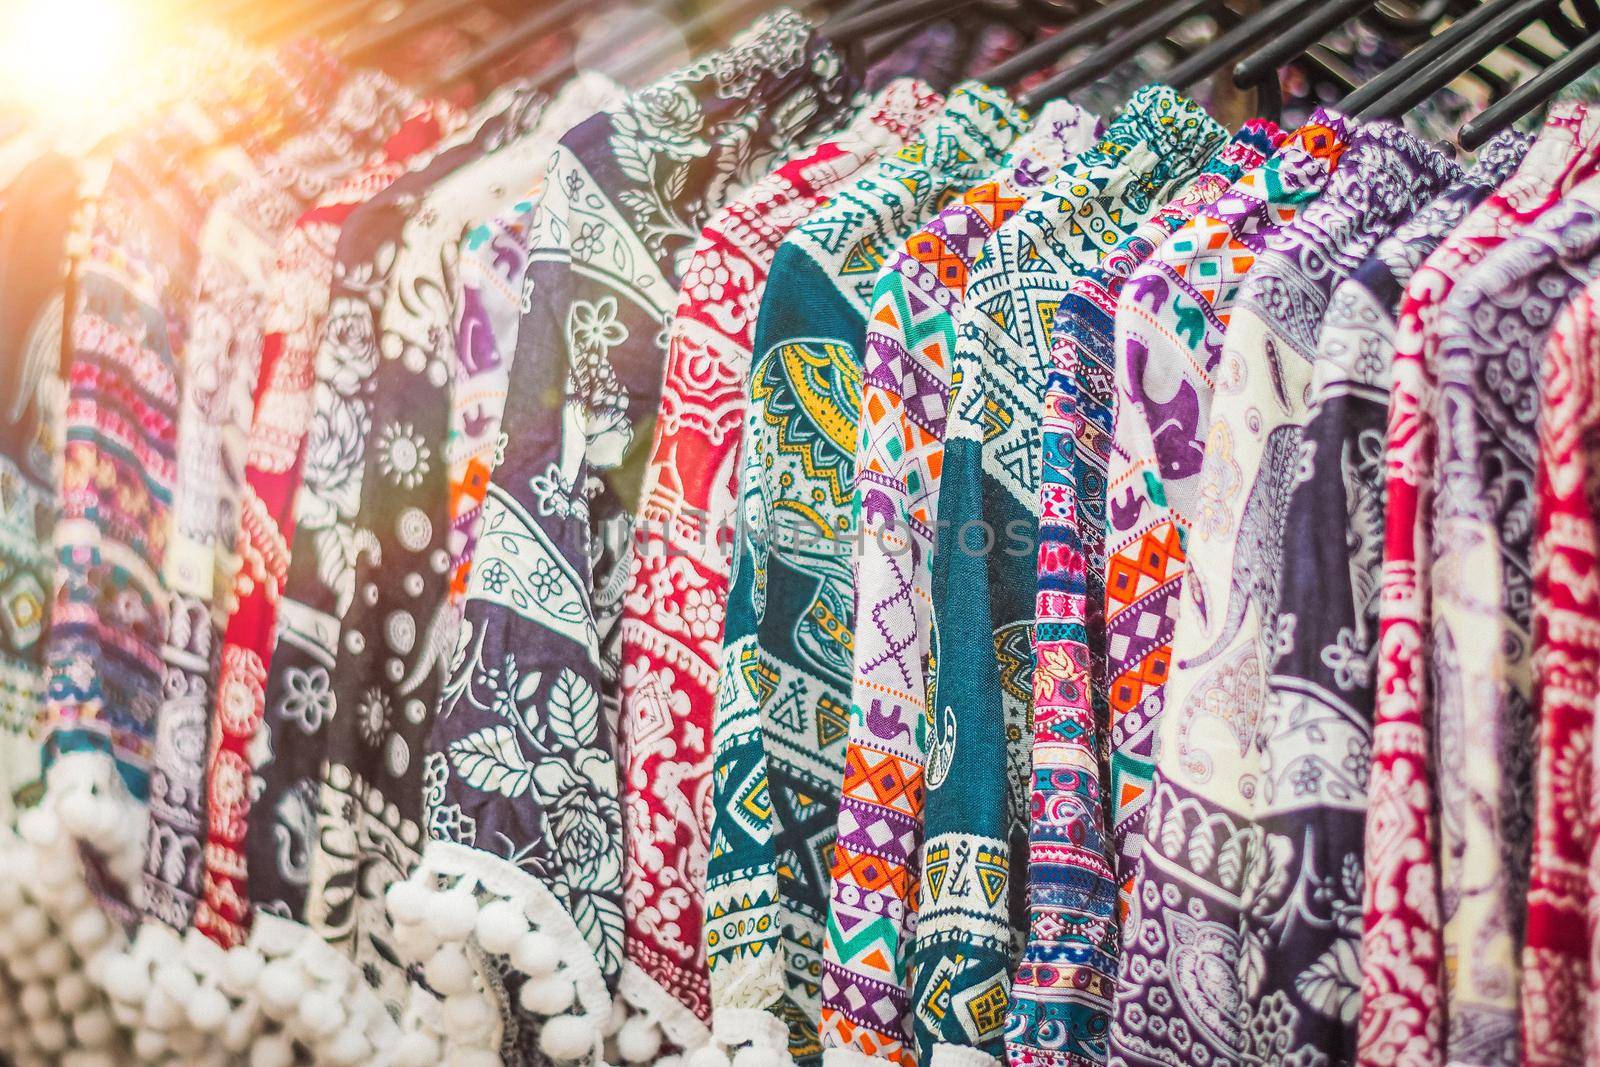 clothes hanging on a rack in a flea market Souvenir shop in Thailand by Petrichor